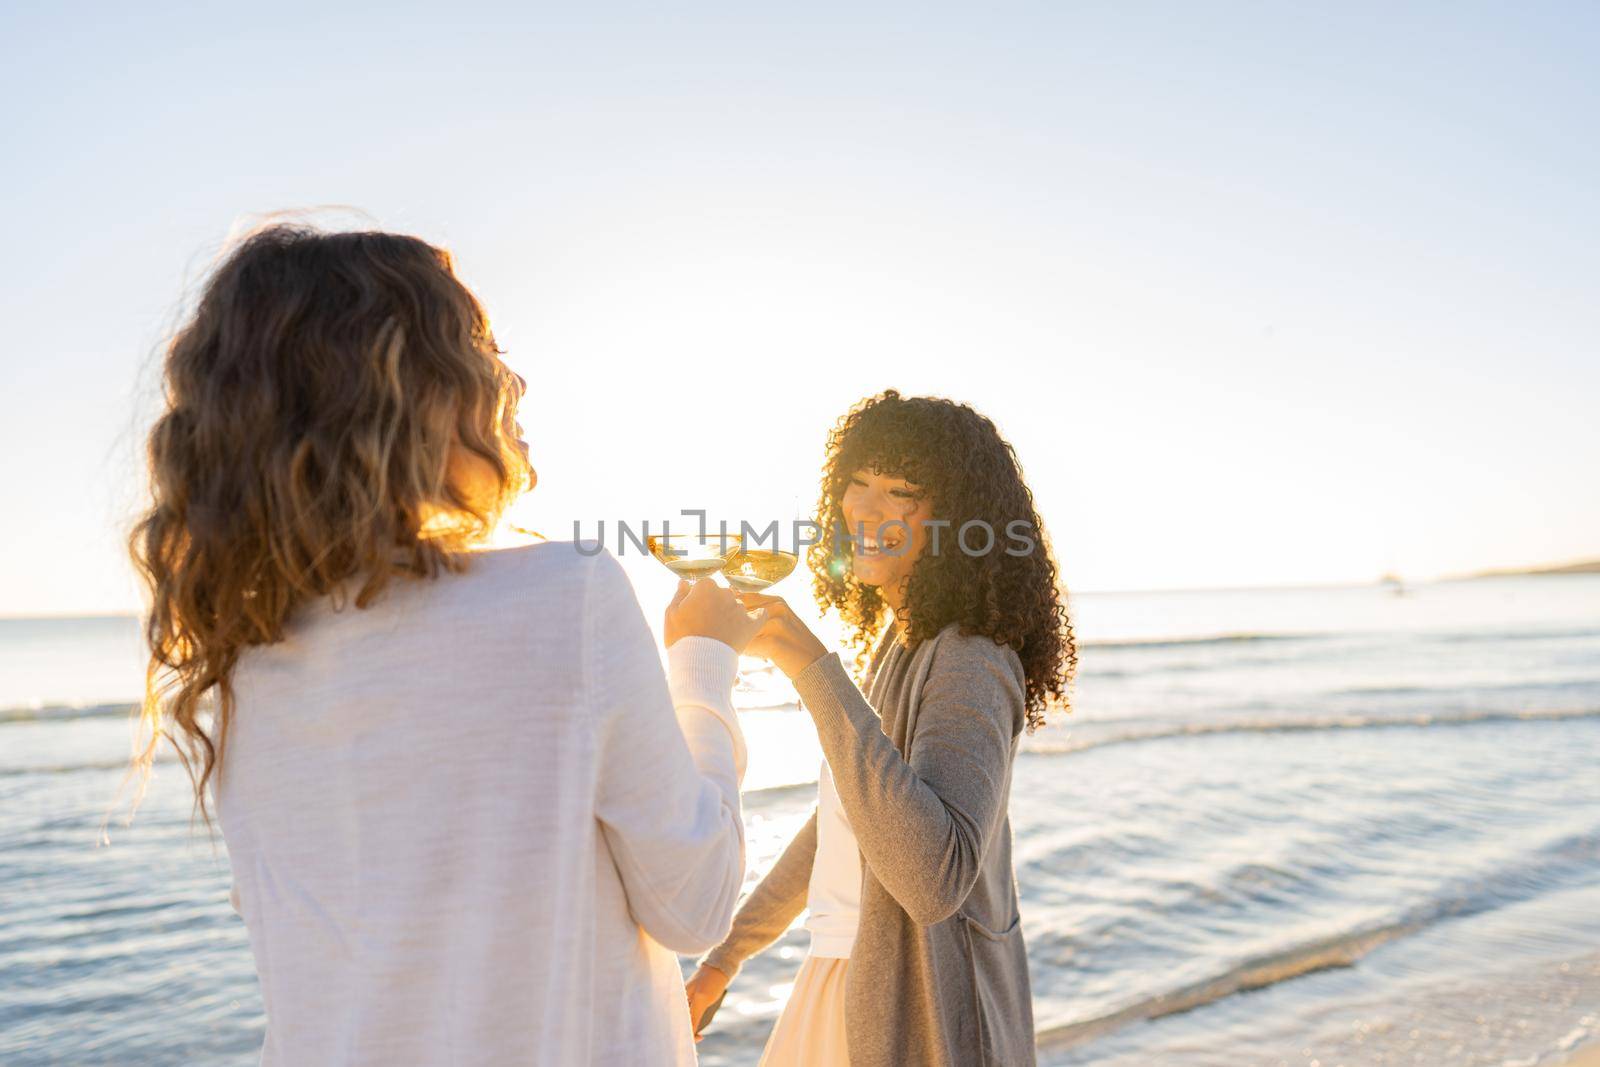 Two beautiful trendy young lesbian girlfriends laugh toasting with white wine at sunset or sunrise with sun reflections running through the crystal glasses. Stylish women having fun on beach